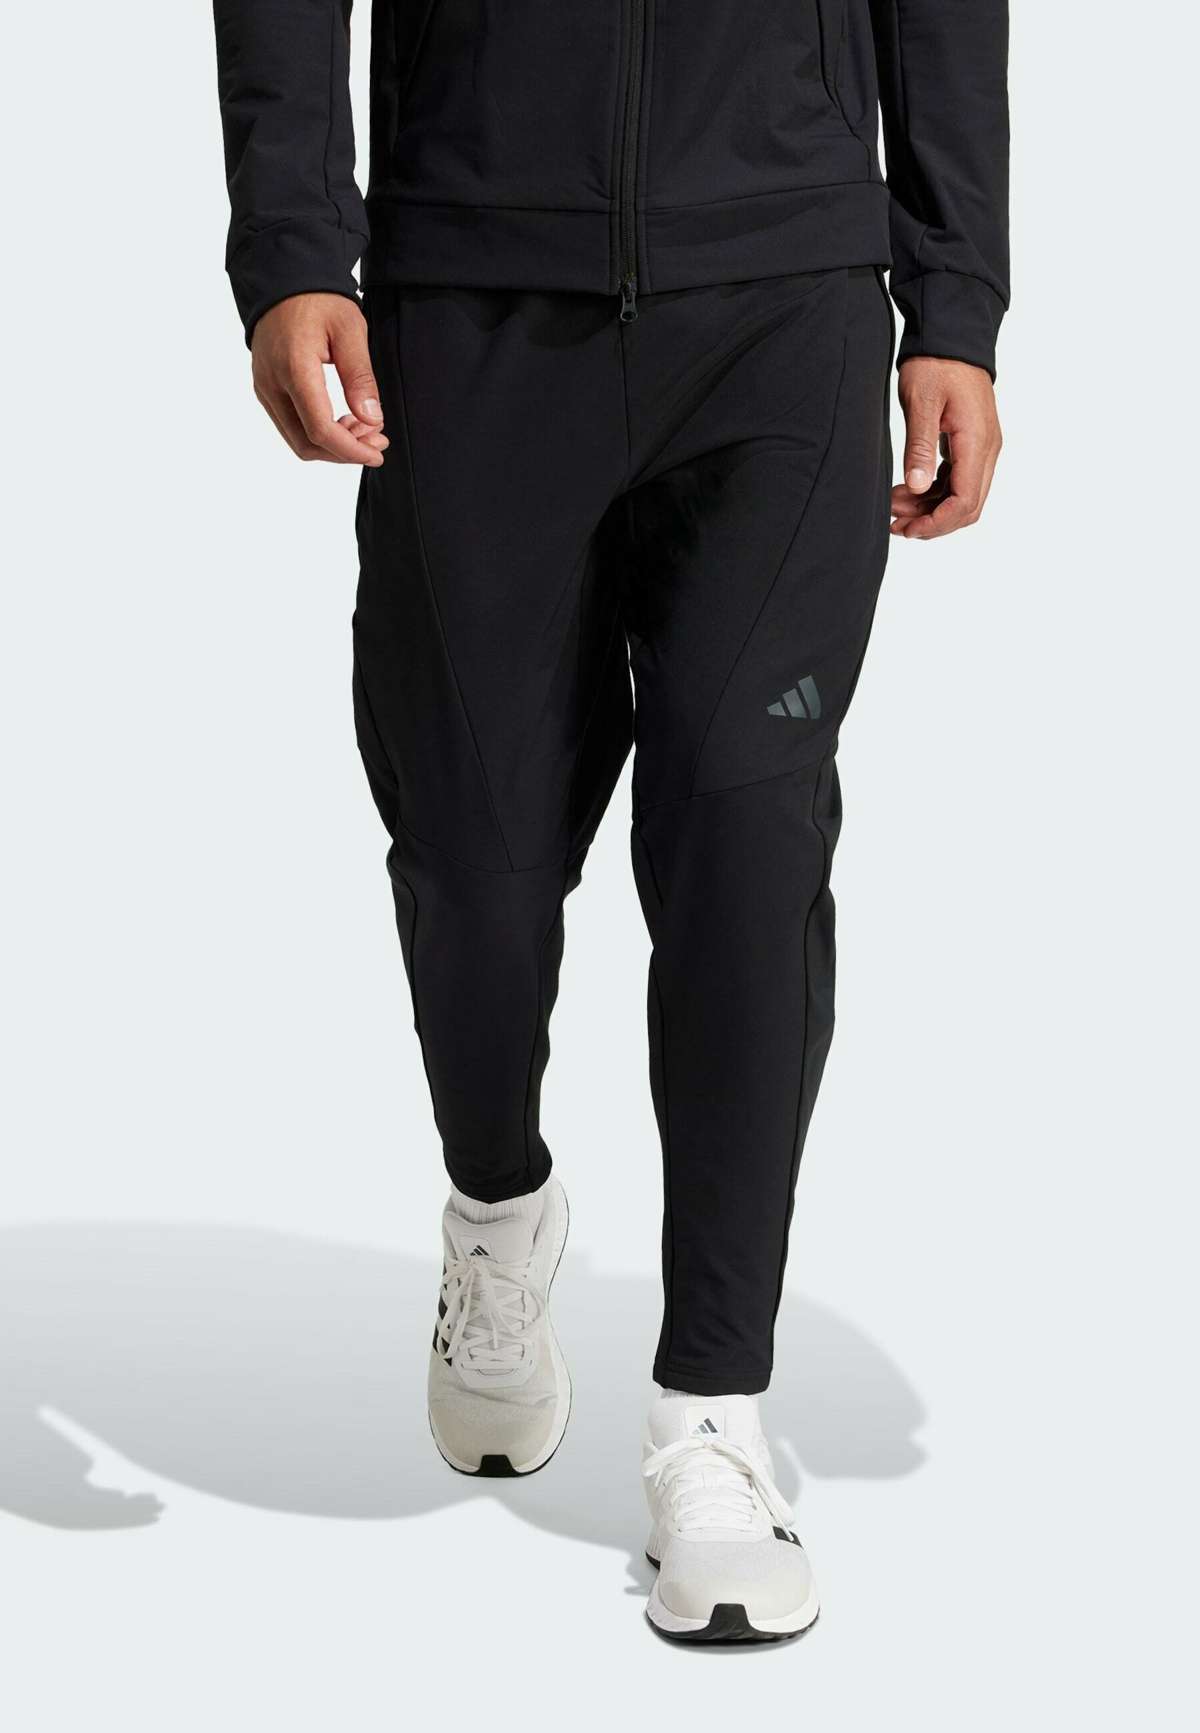 Брюки DESIGNED FOR TRAINING COLD DESIGNED FOR TRAINING COLD